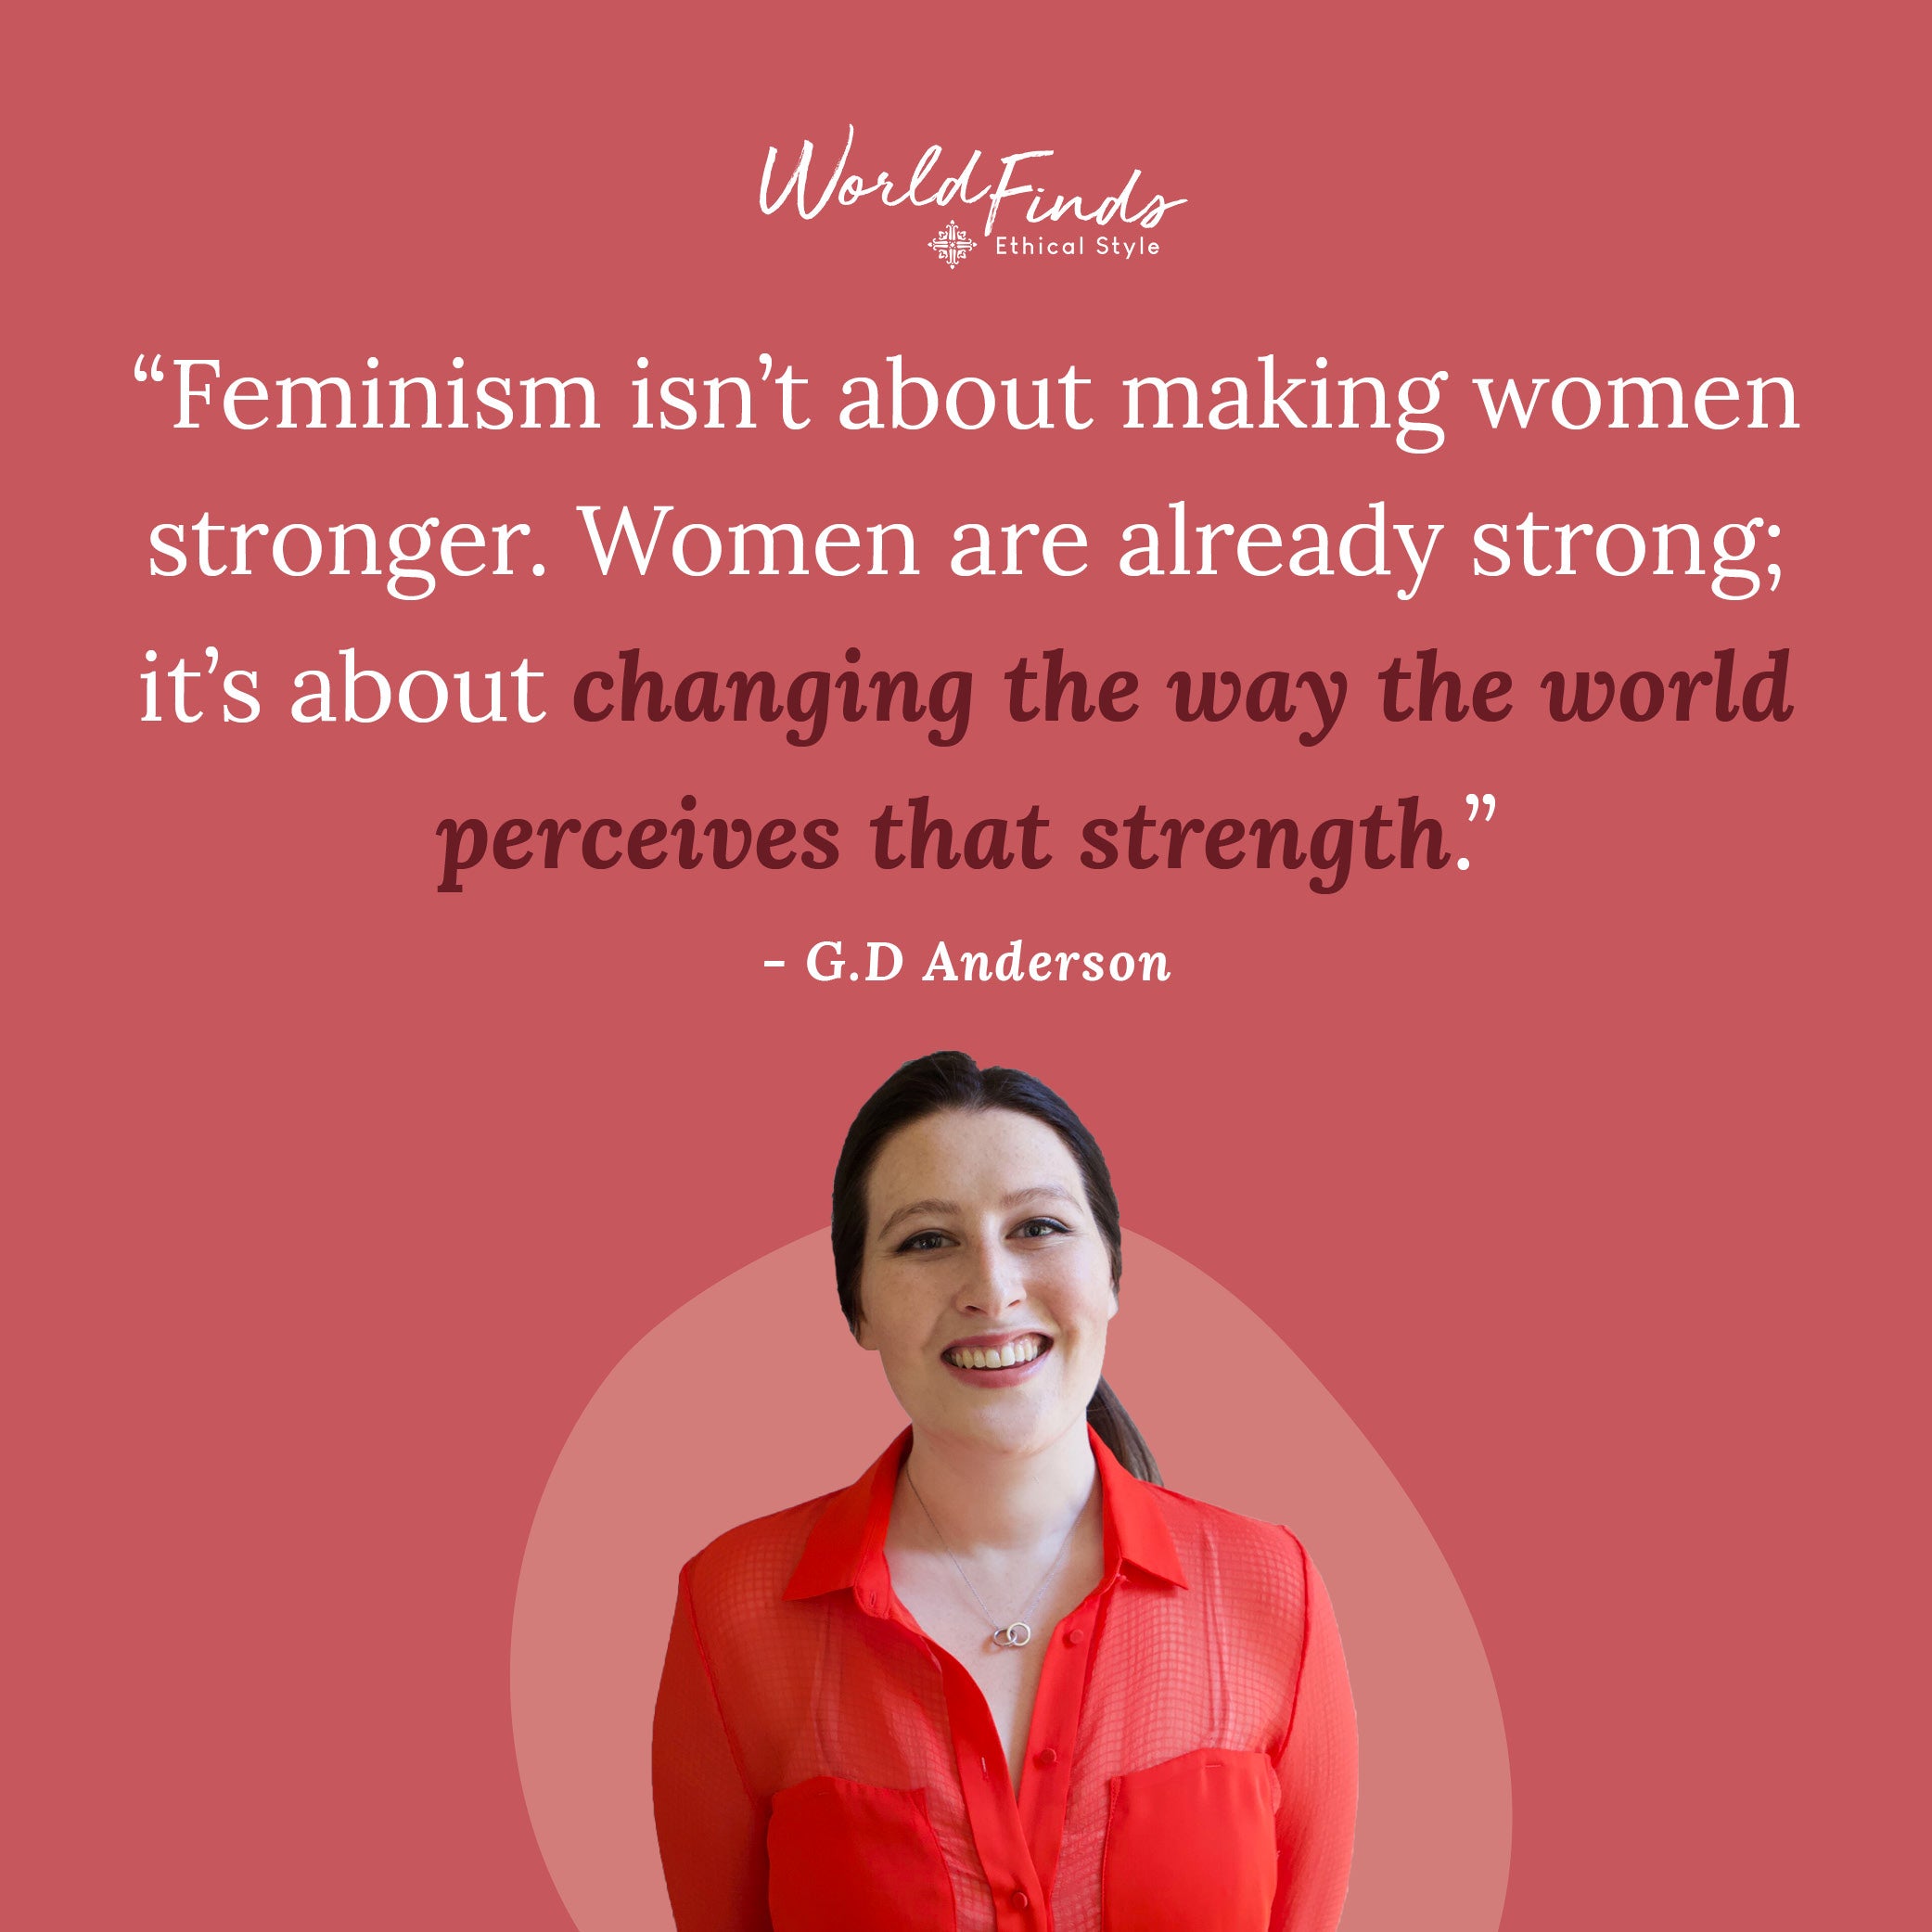 Quote from GD Anderson, "Feminism isn't about making women stronger. Women are already strong; it's about changing the way the world perceives that strength."